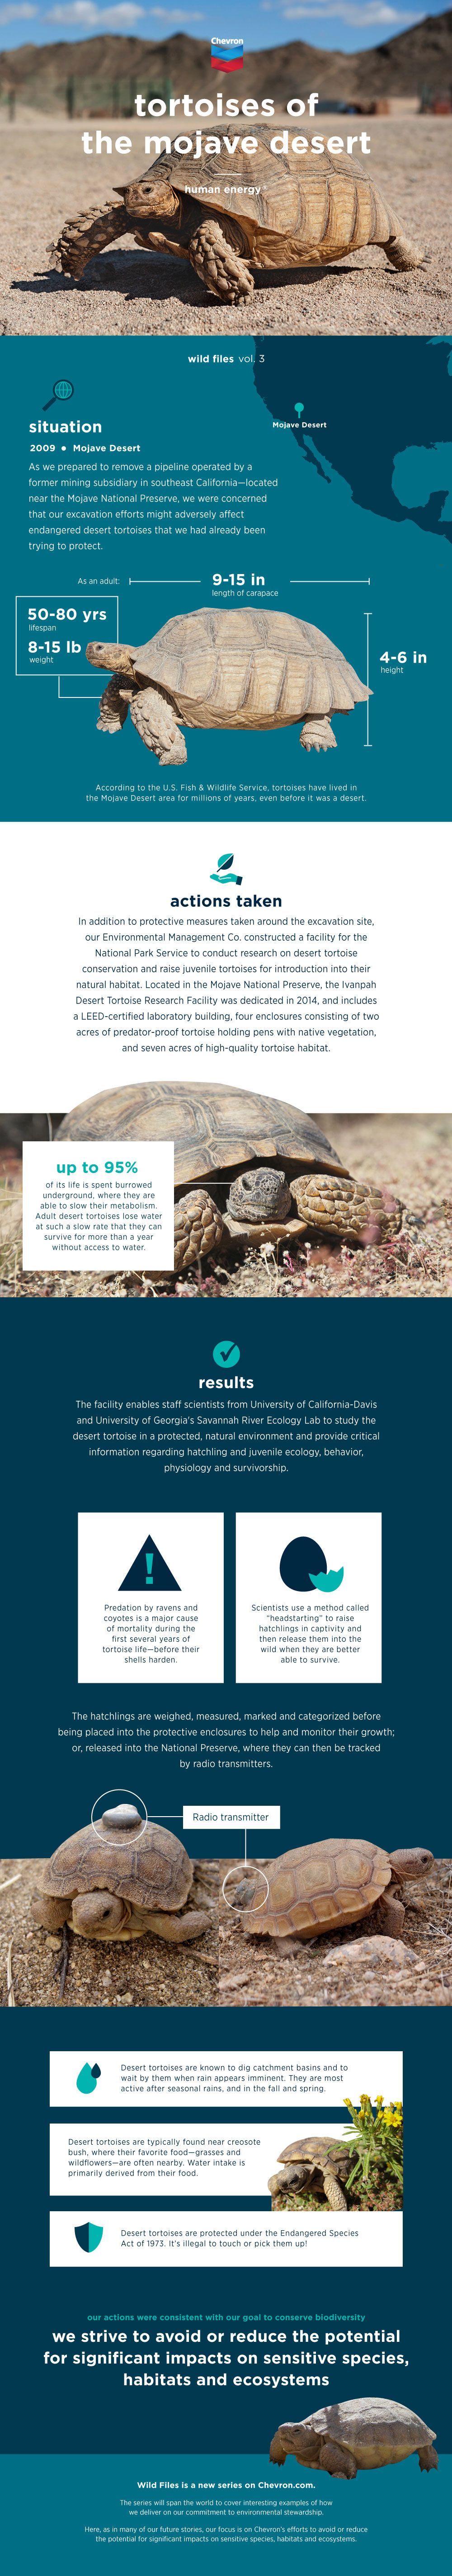 Wild Files: Protecting an Endangered Species of Tortoises in the Mojave Desert